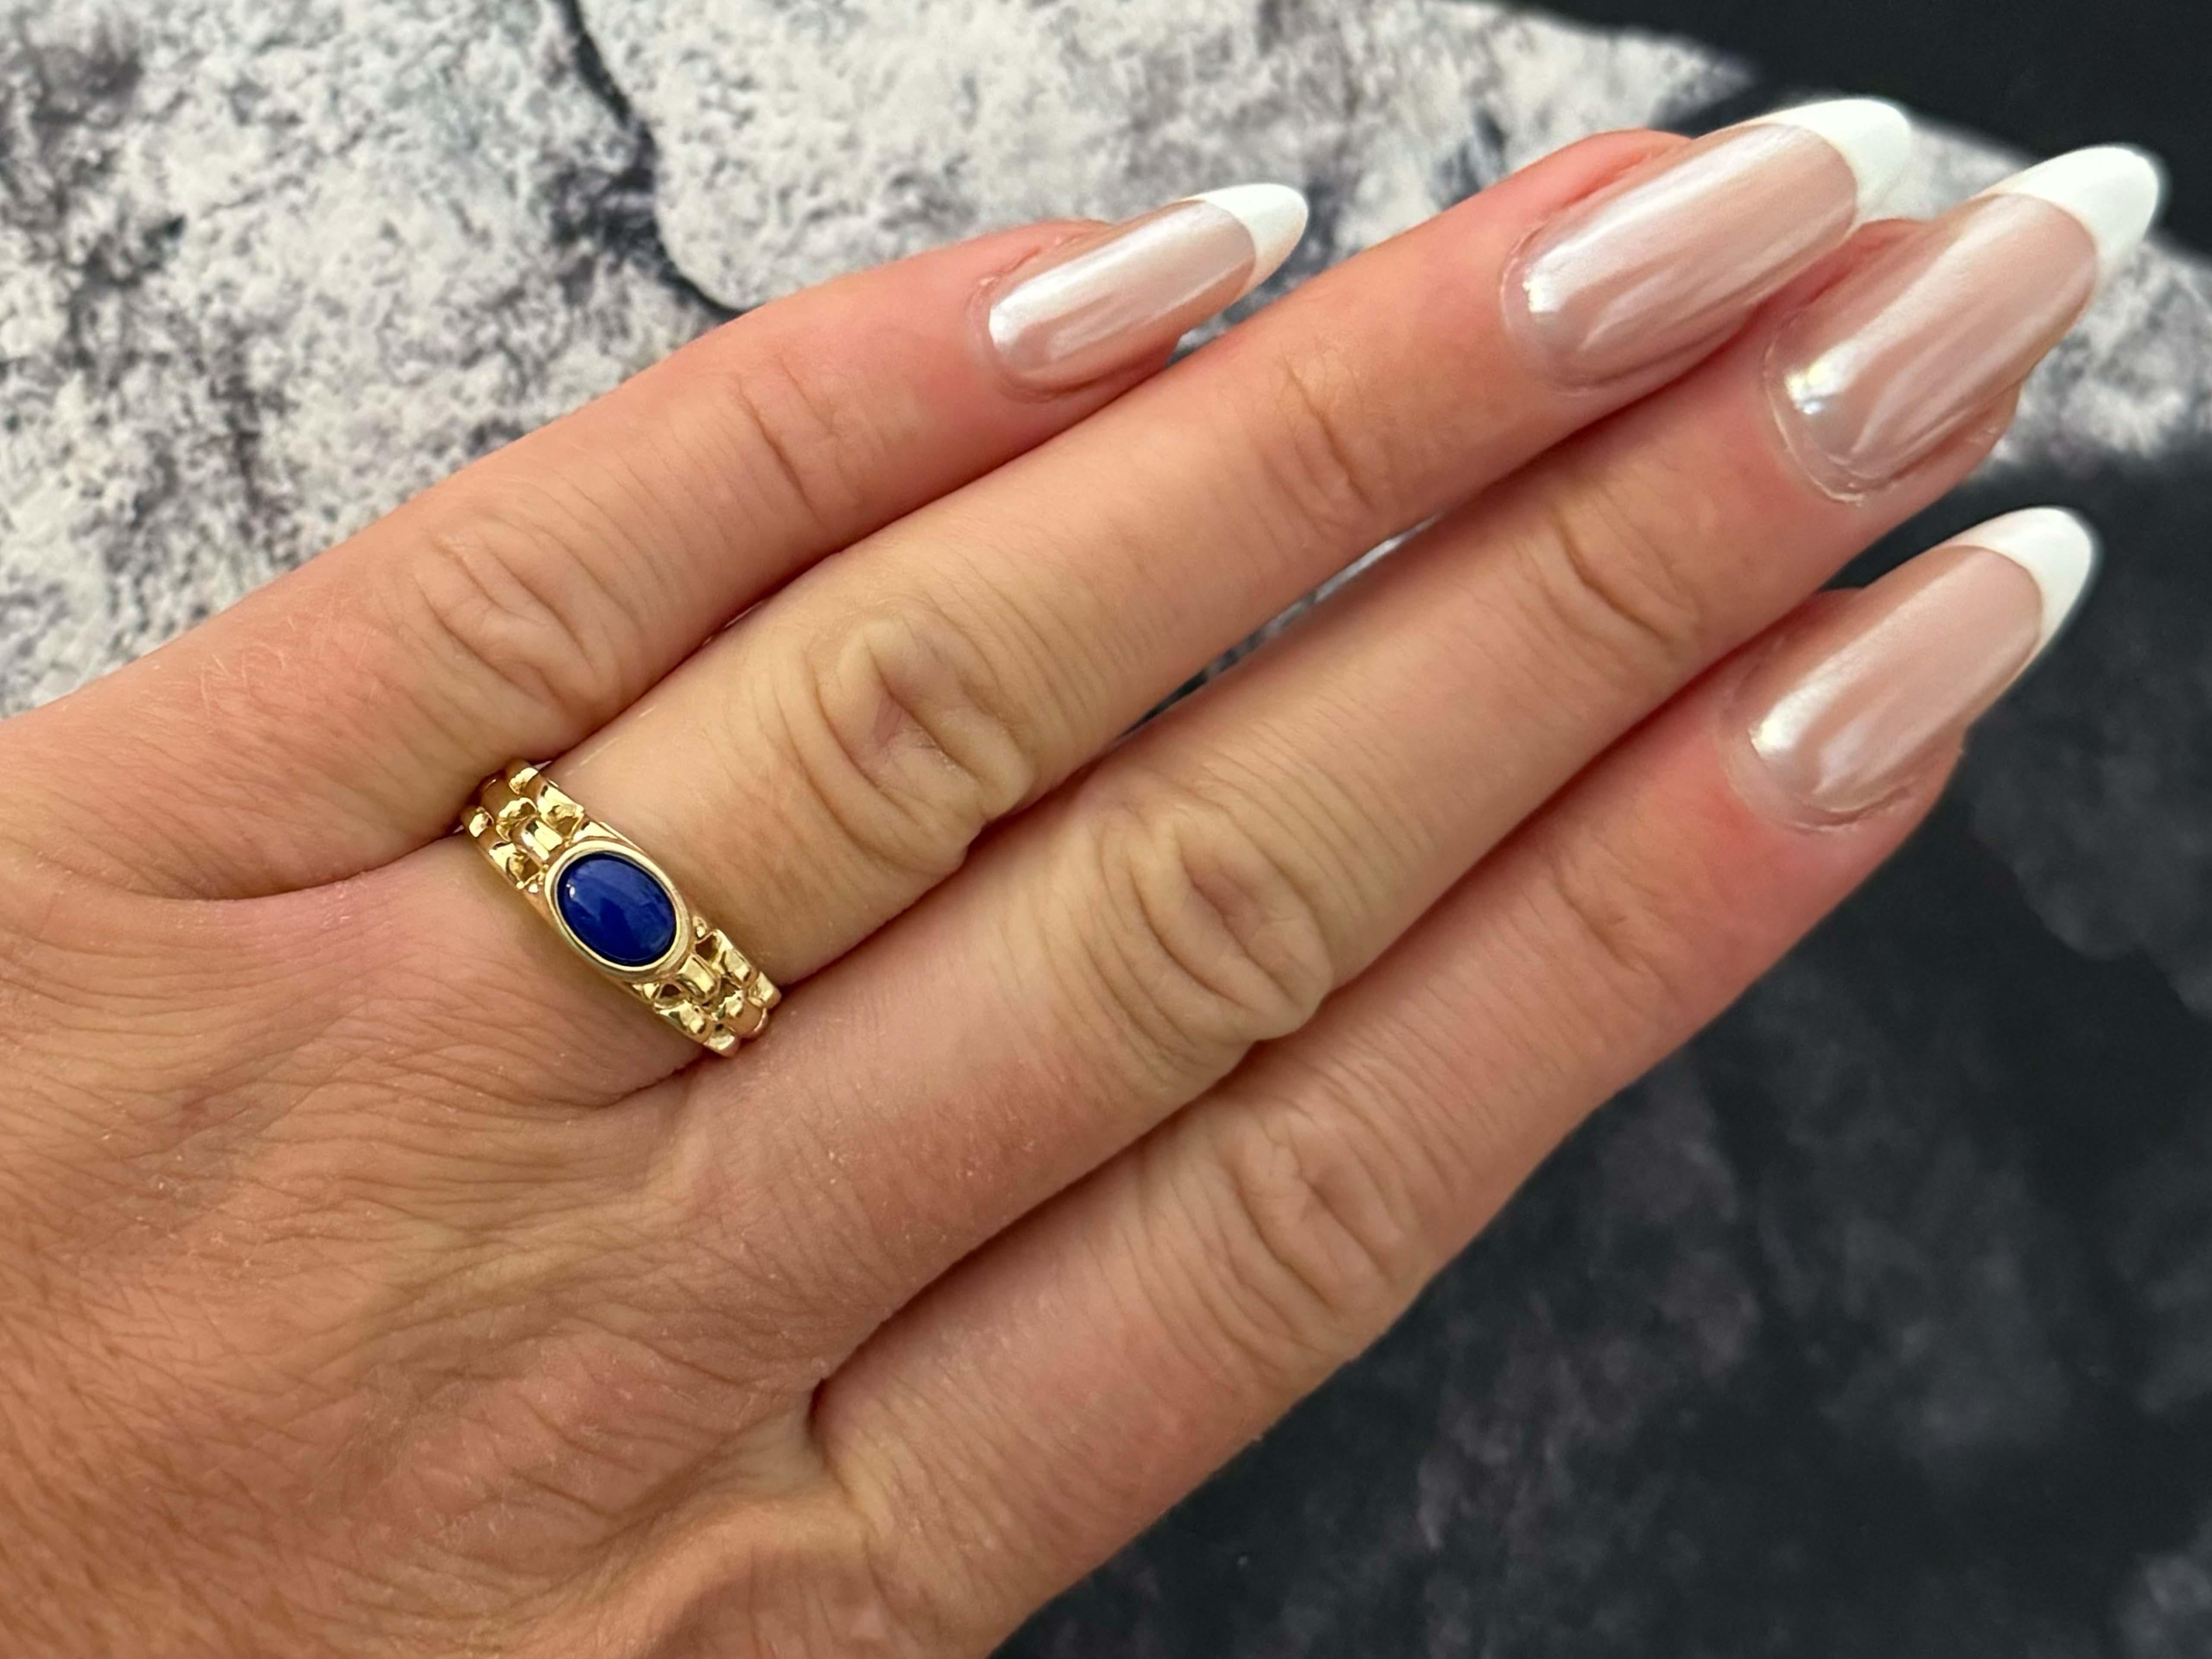 Ring Specifications:

Metal: 14k Yellow Gold

Total Weight: 2.5 Grams

Gemstone: Lapis Lazuli

Lapis Lazuli Measurements: ~6.6 mm x  4.9 mm x 2.5 mm

Ring Size: 6.75 (resizable)

Stamped: 